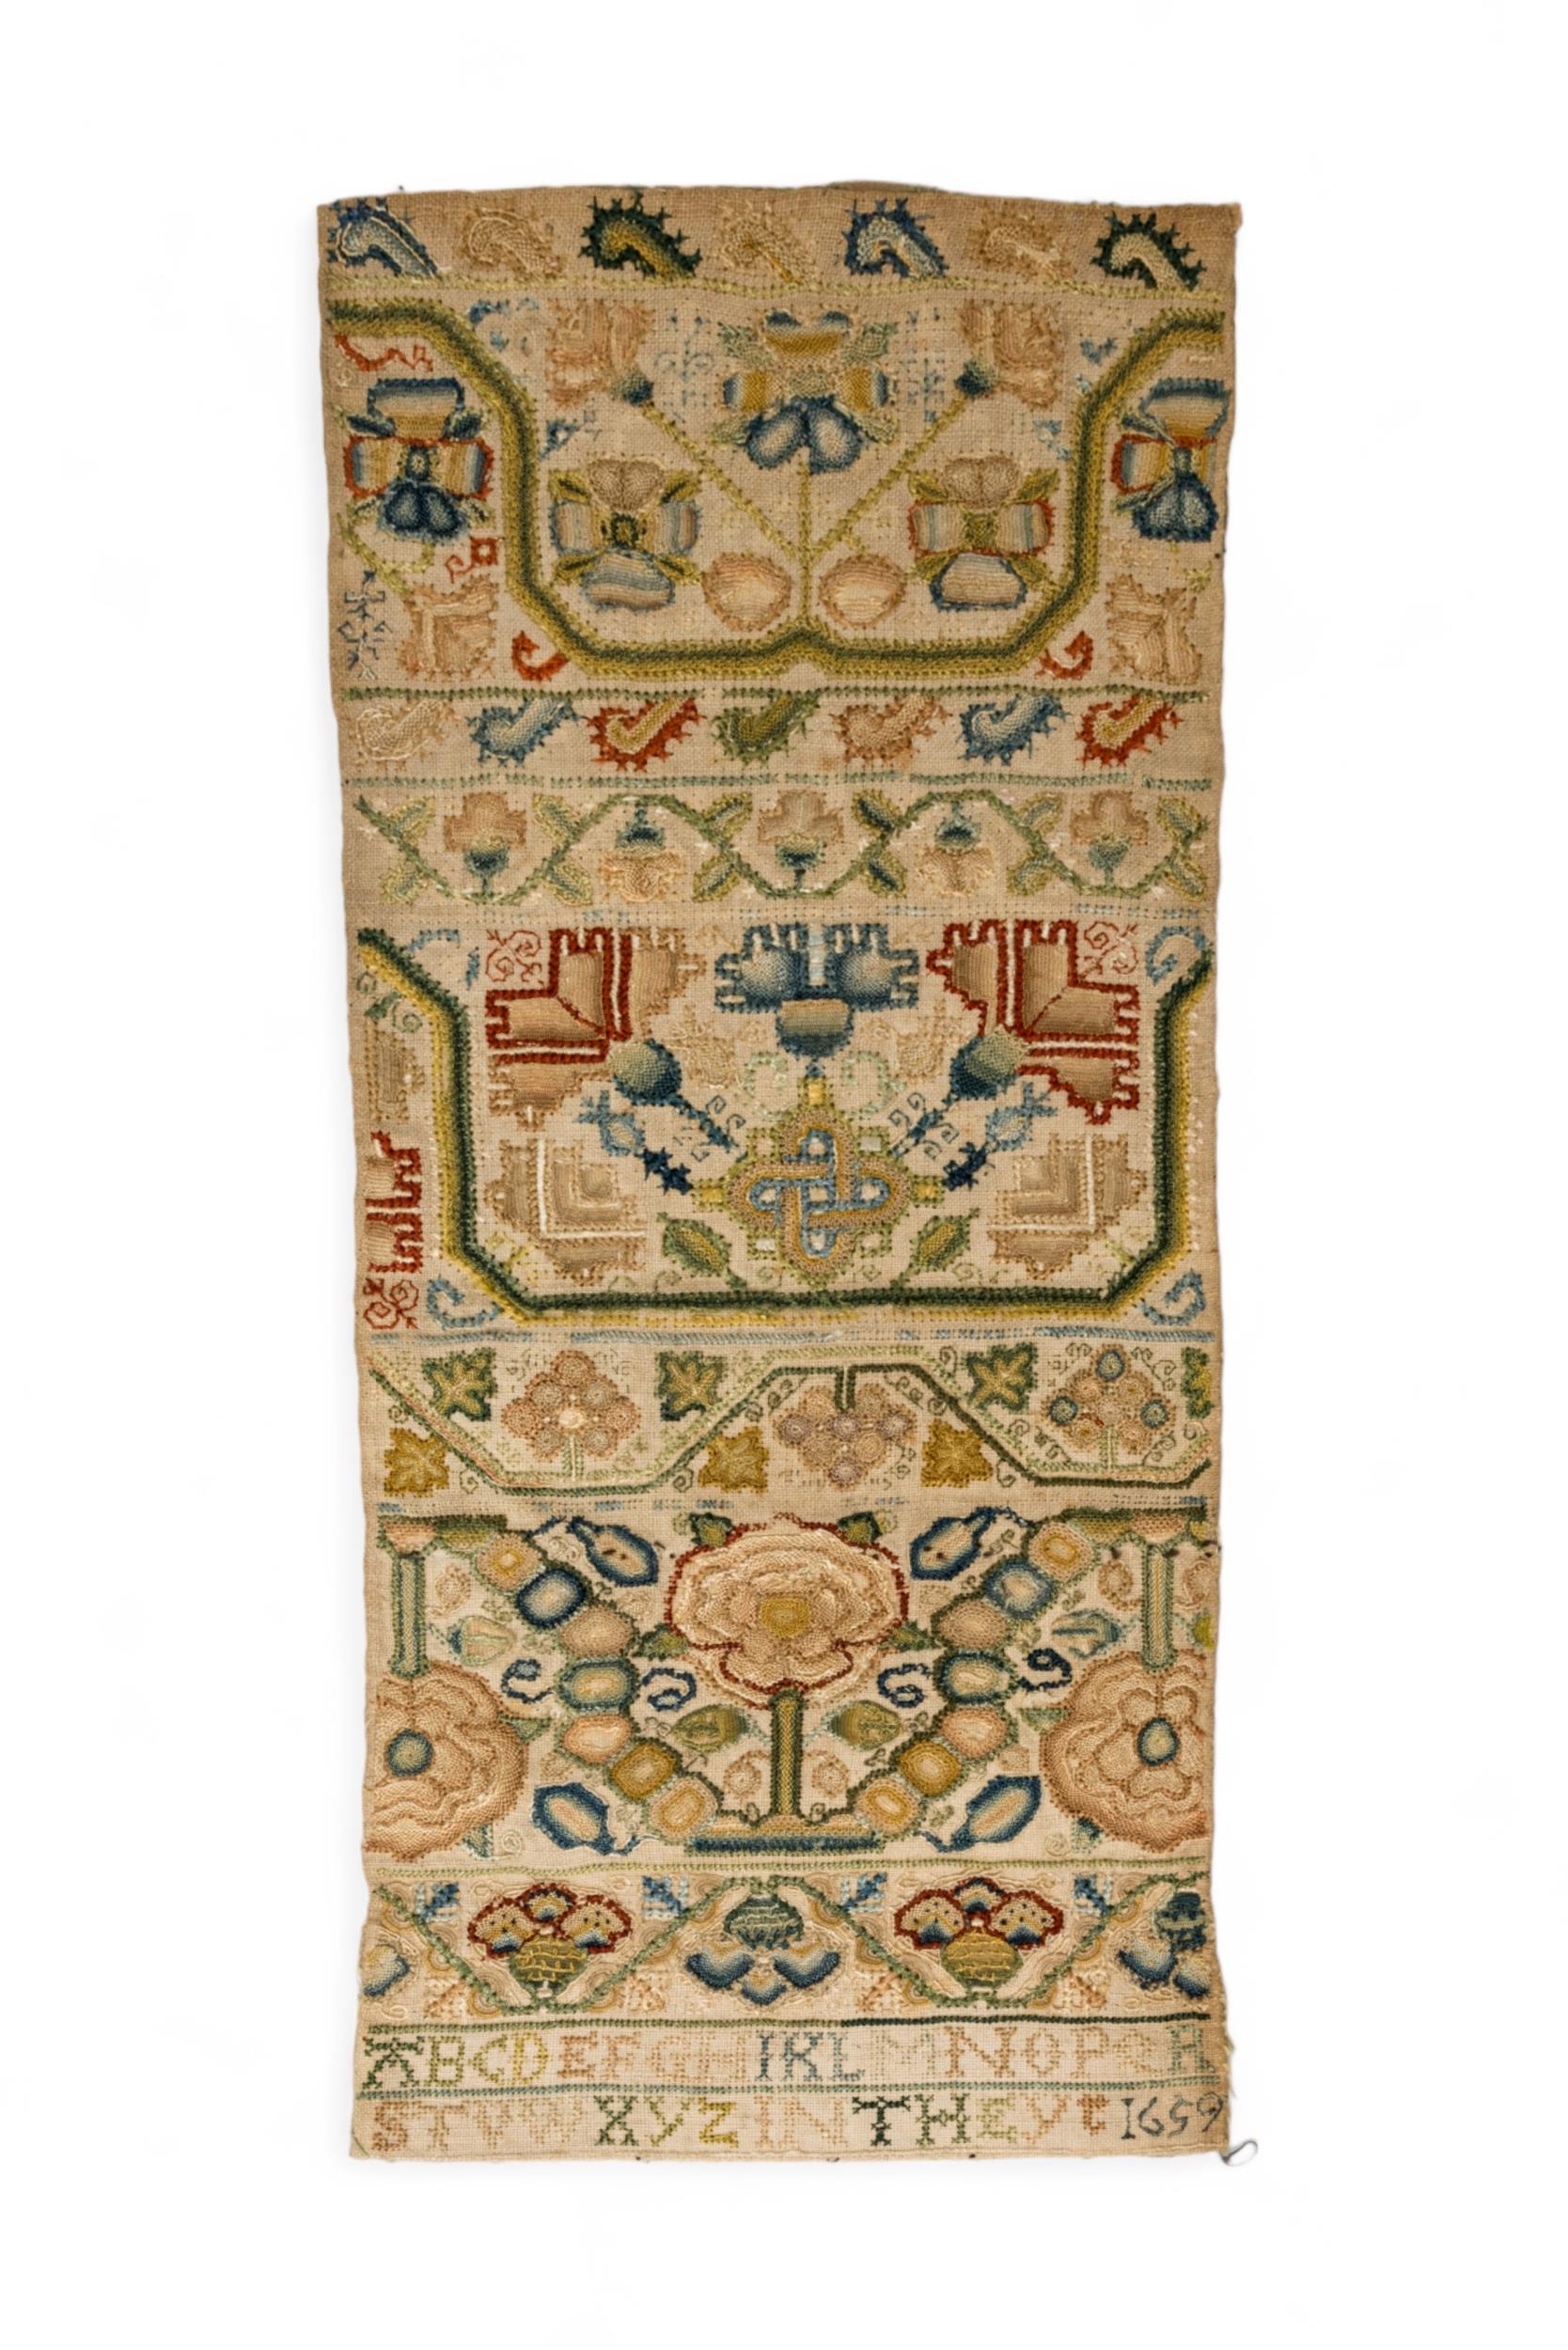 A 17TH CENTURY BAND SAMPLER the finely executed work with panels of flowers and meandering bands